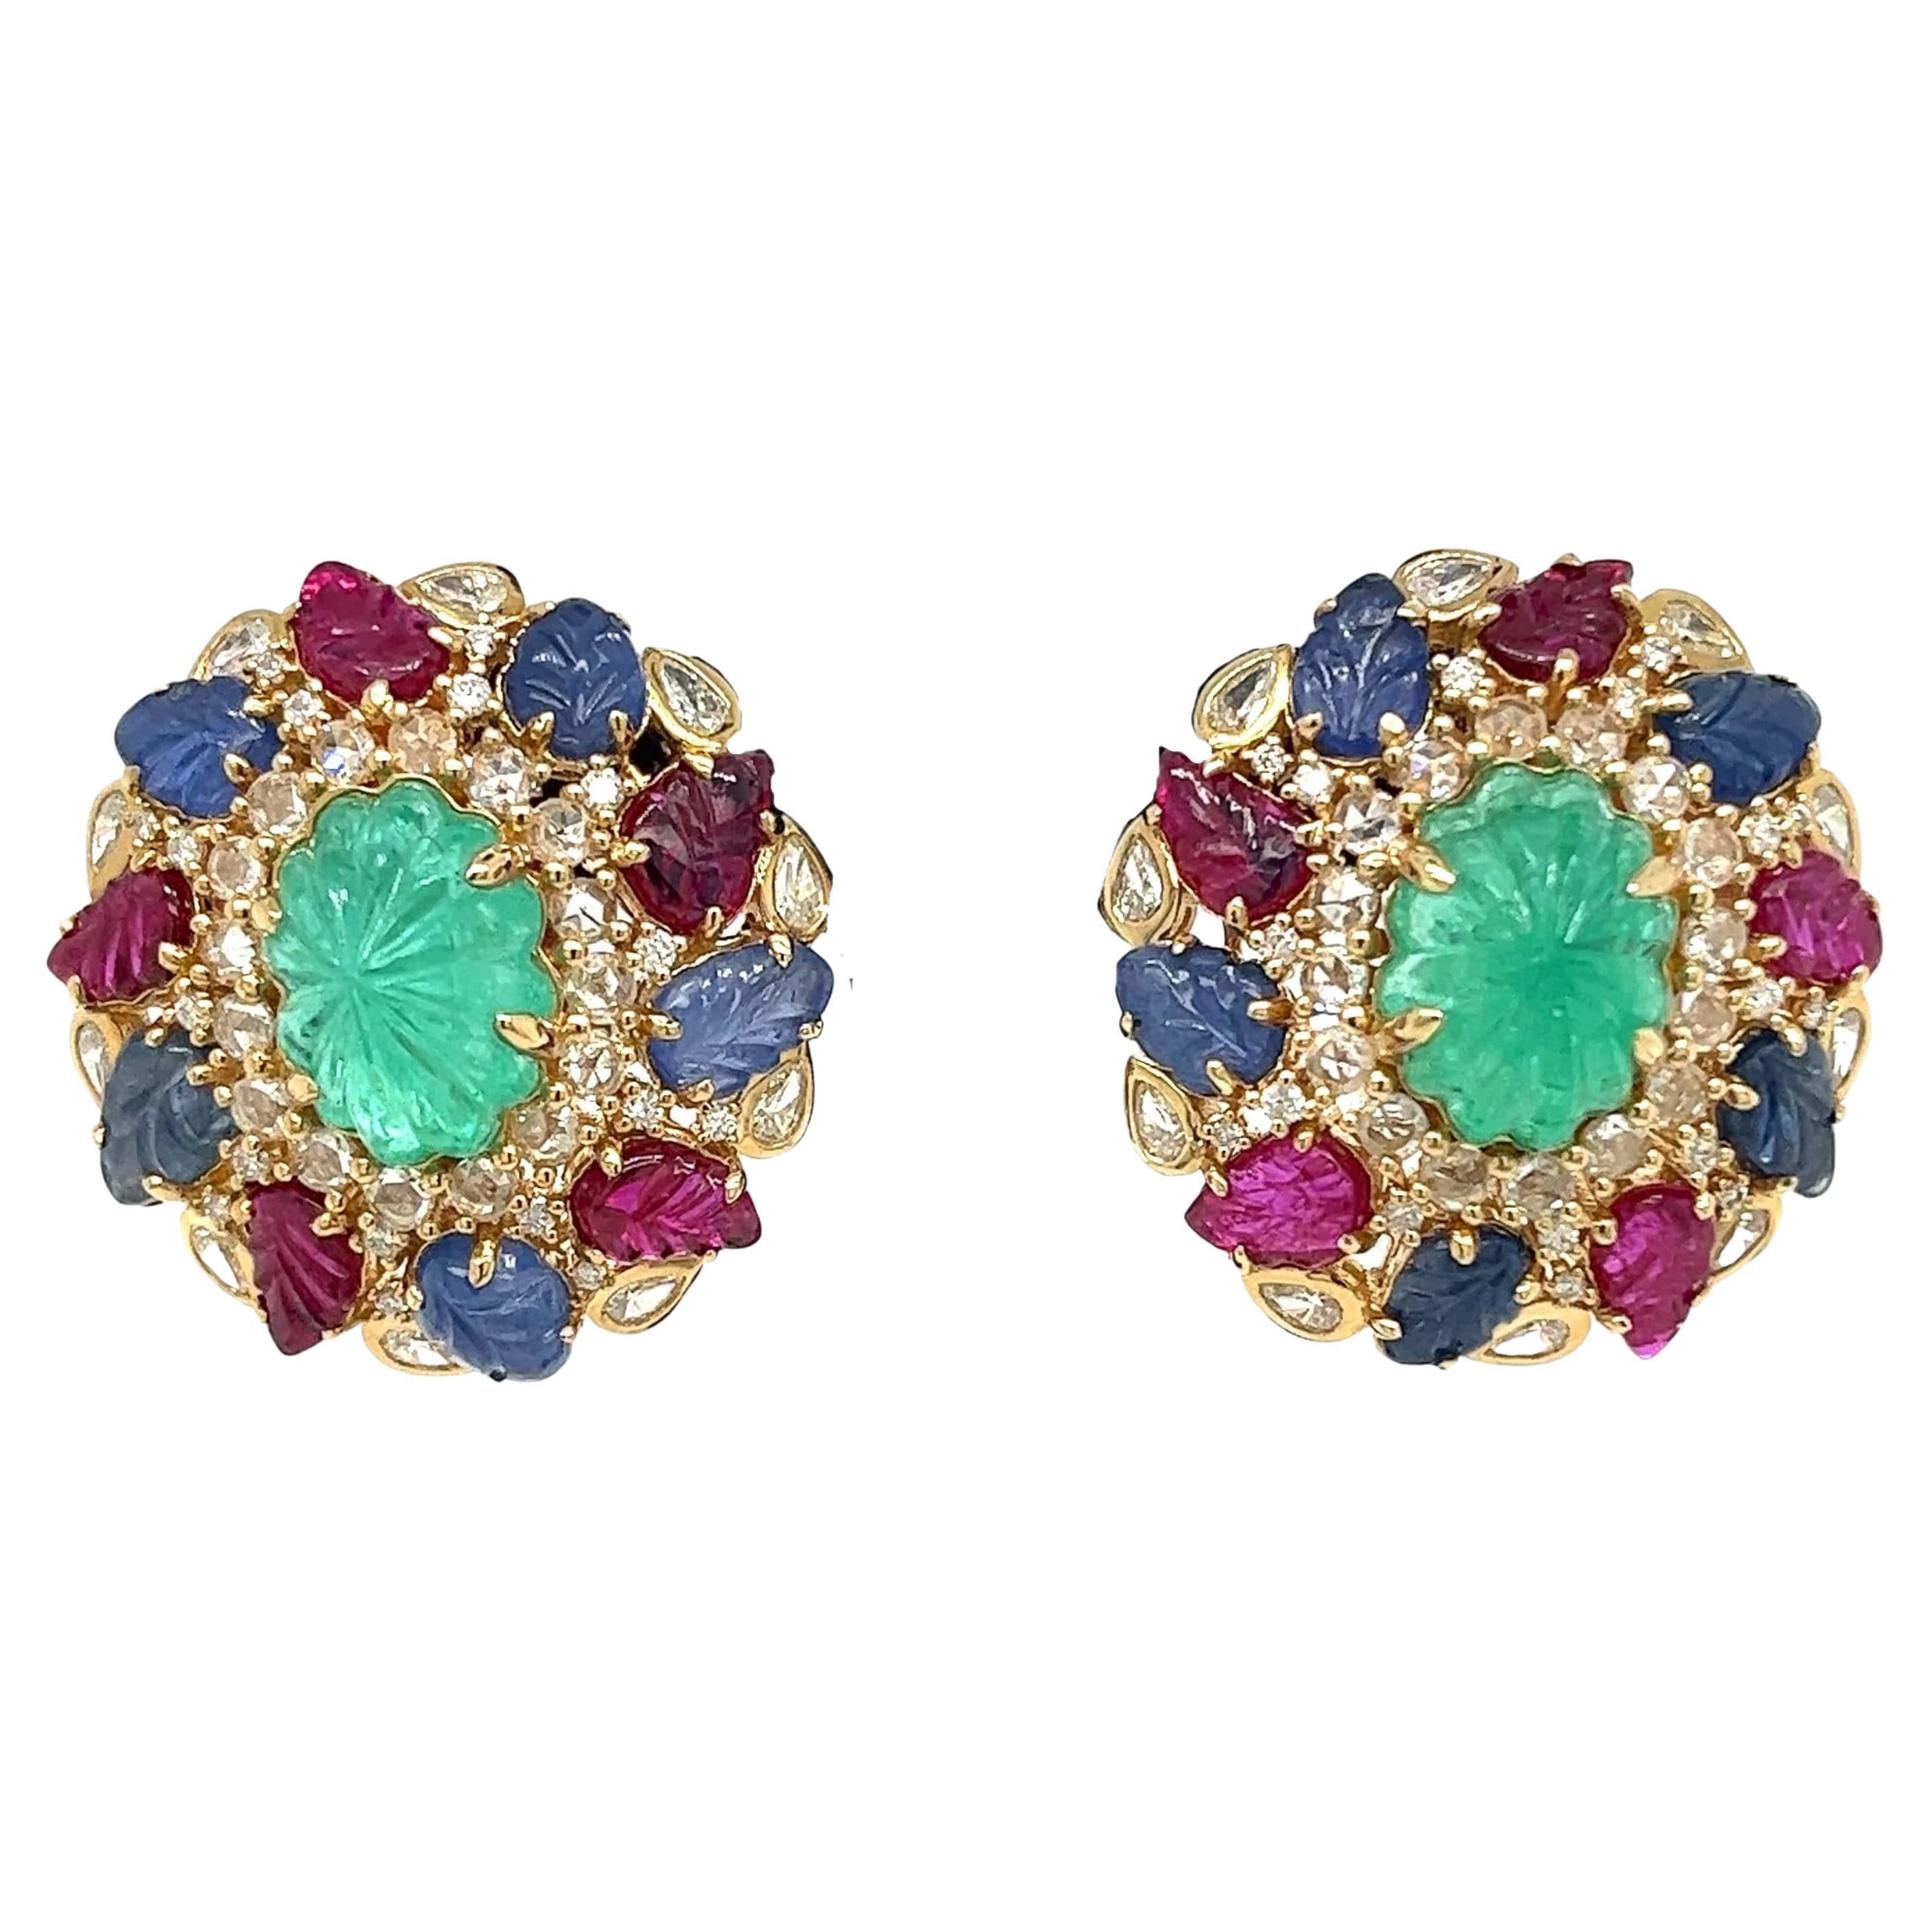 18K Gold Colombian Origin Rubies & Emeralds & Sapphires Earrings with Diamonds For Sale